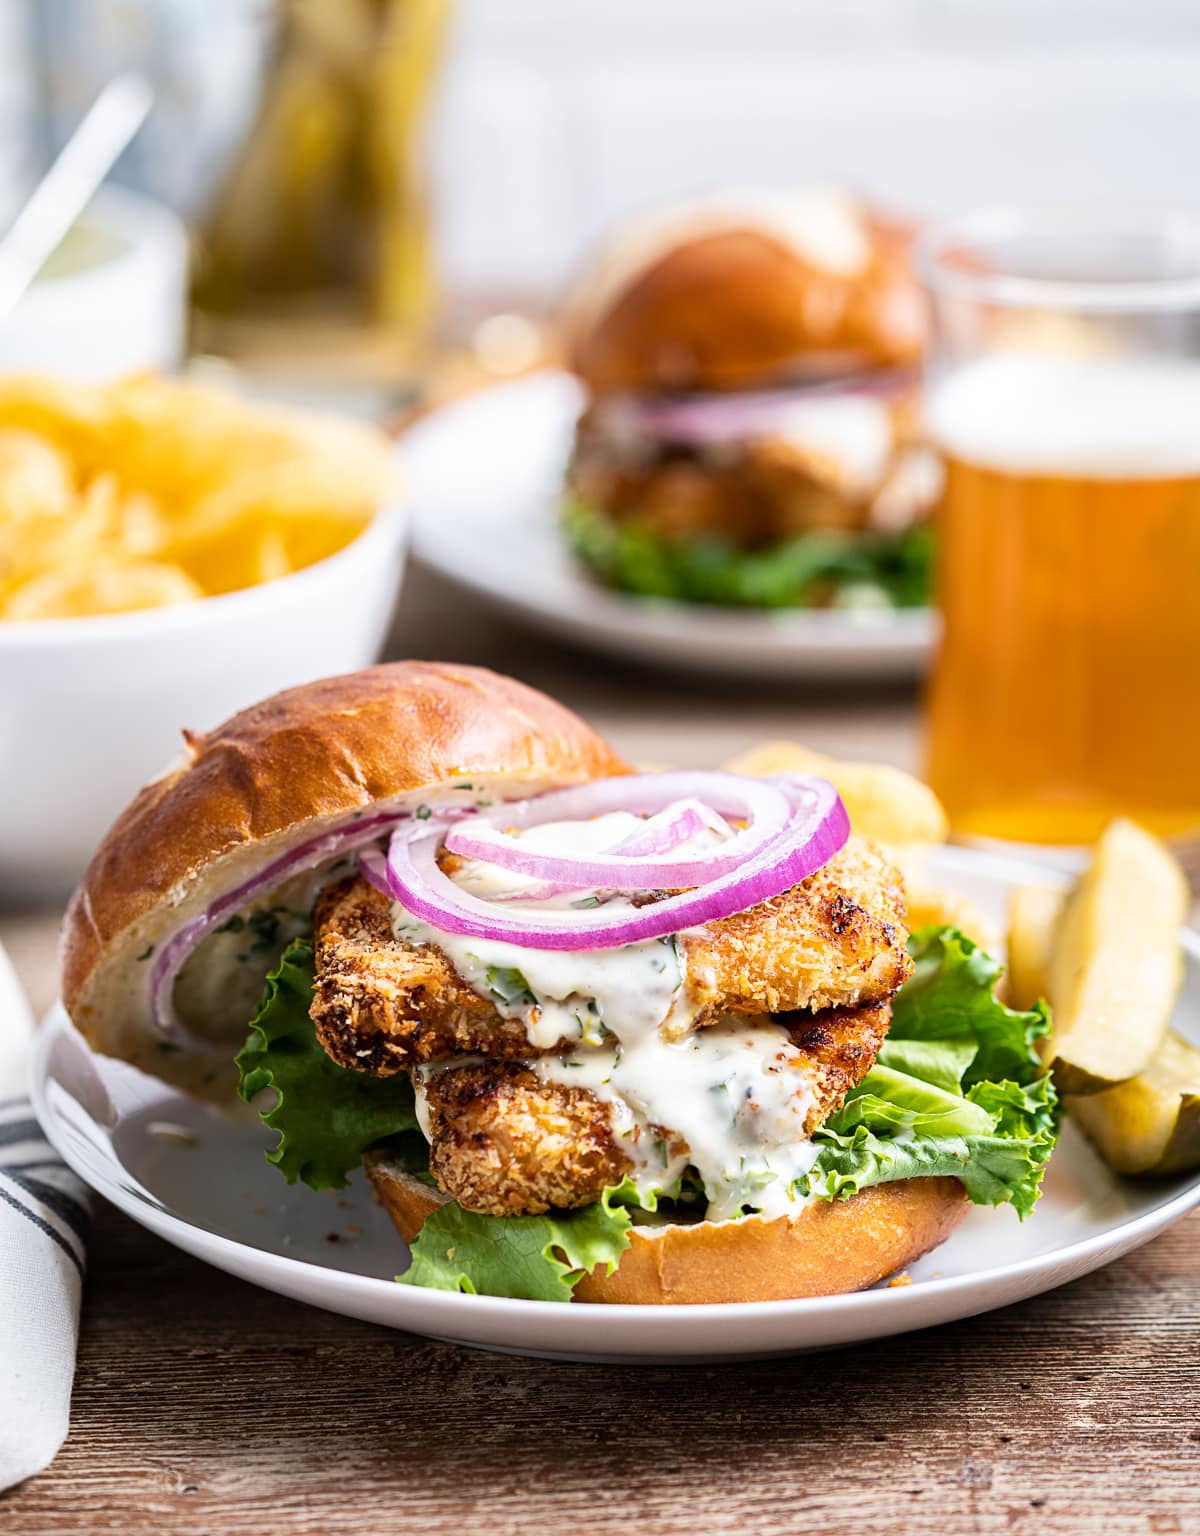 two pieces of breaded air fryer chicken sandwiched in a pretzle bun with green lettuce, red onion slices, pickles and chips on plate, bowl of chips, glass and bottle of beer